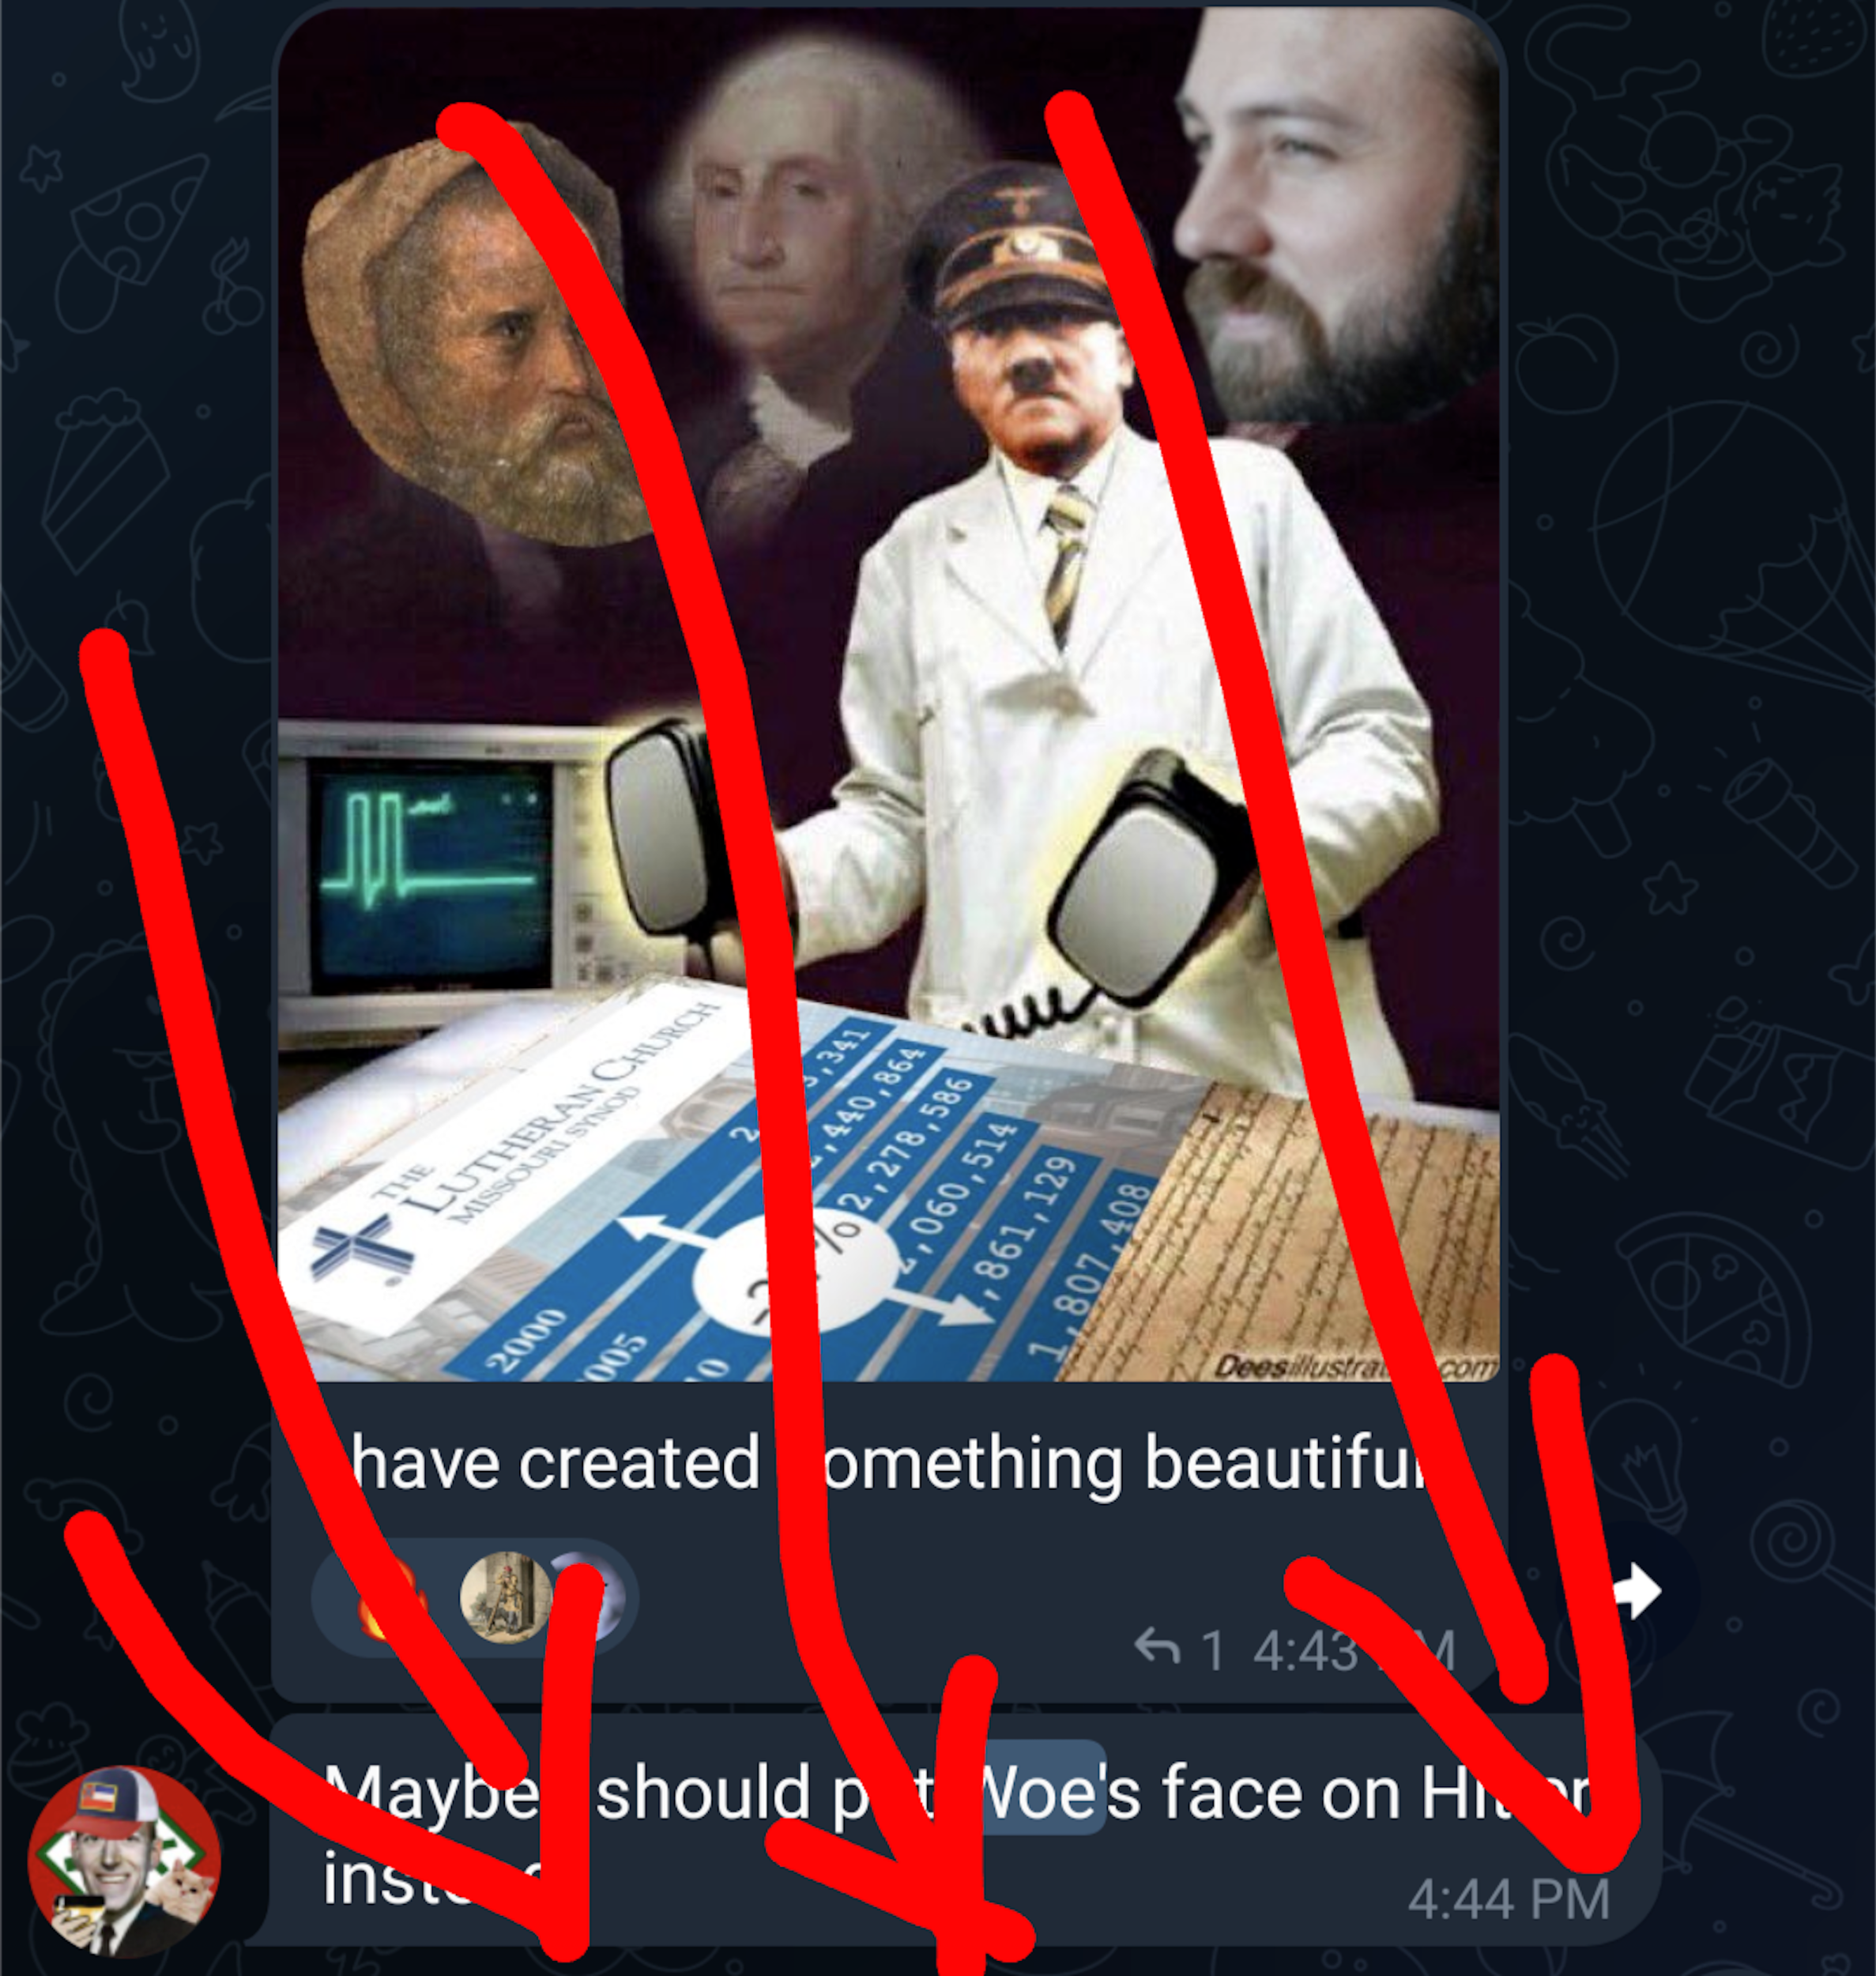 Telegram post featuring Woe's avatar, Hitler, Mahler, George washington. Poster says: I have created something beautiful. Reply to OP says he should put Woe's face on Hitler